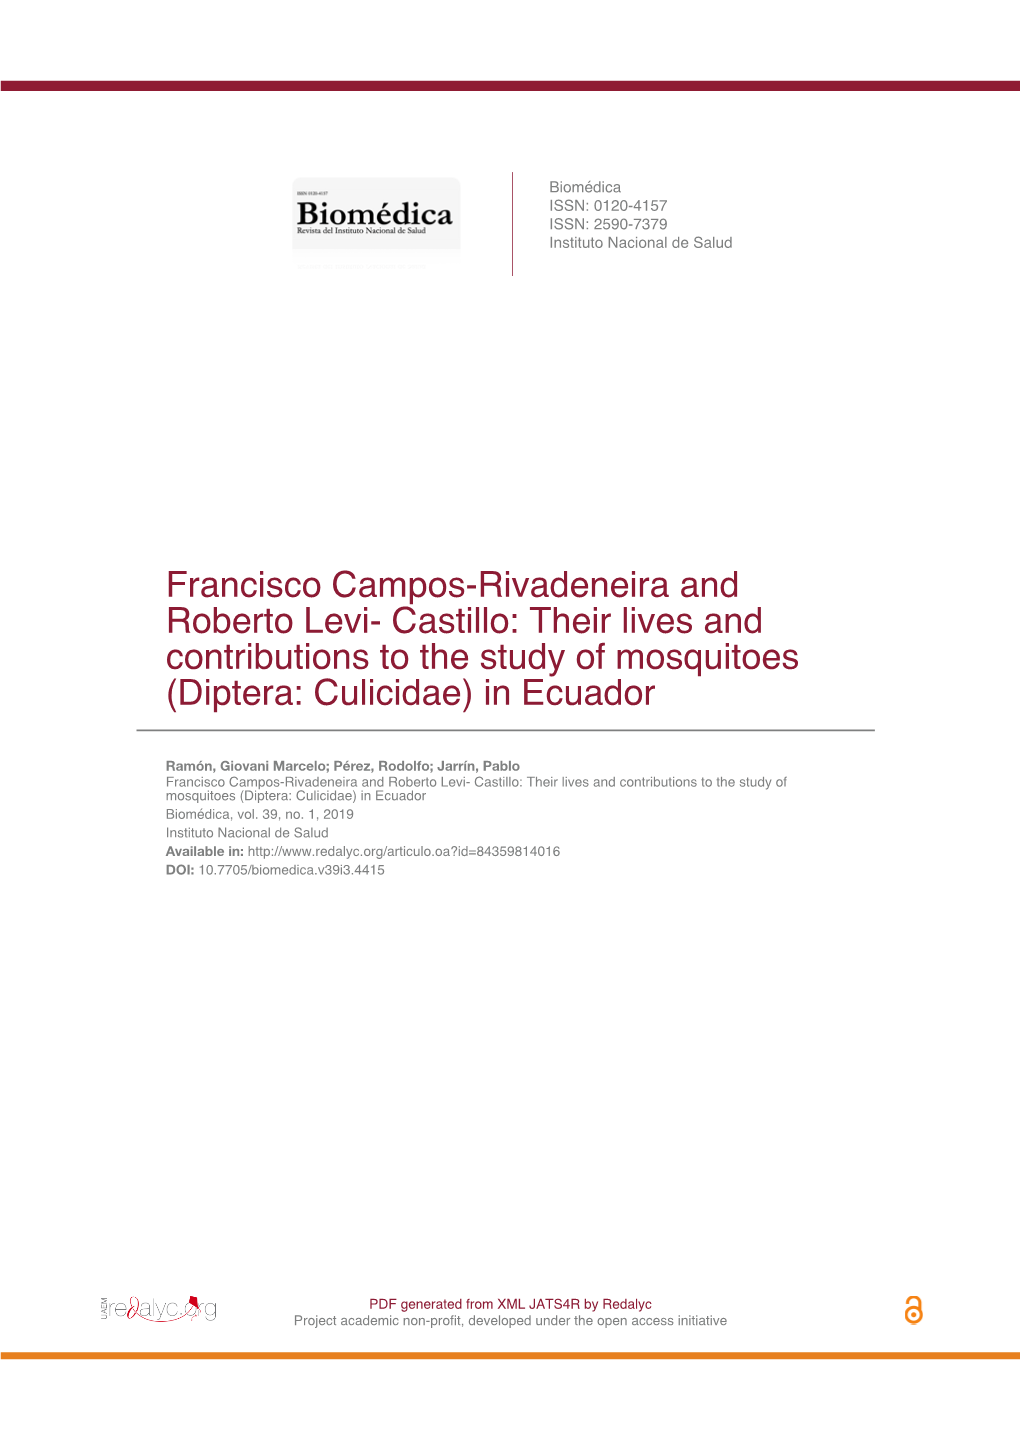 Francisco Campos-Rivadeneira and Roberto Levi- Castillo: Their Lives and Contributions to the Study of Mosquitoes (Diptera: Culicidae) in Ecuador